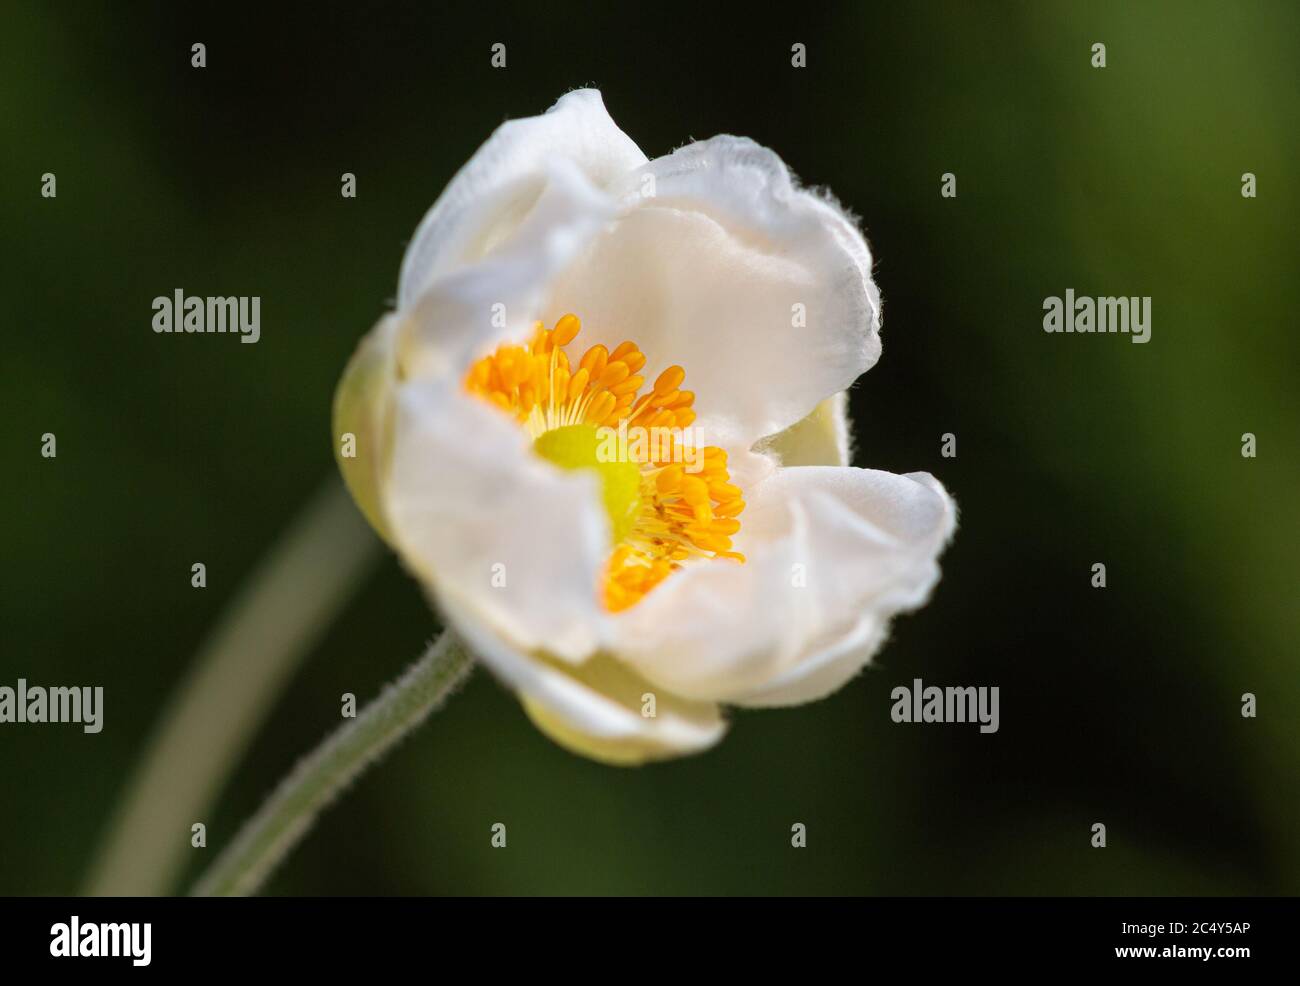 single white anemone blossom opening in botanical garden with blurred bokeh background Stock Photo